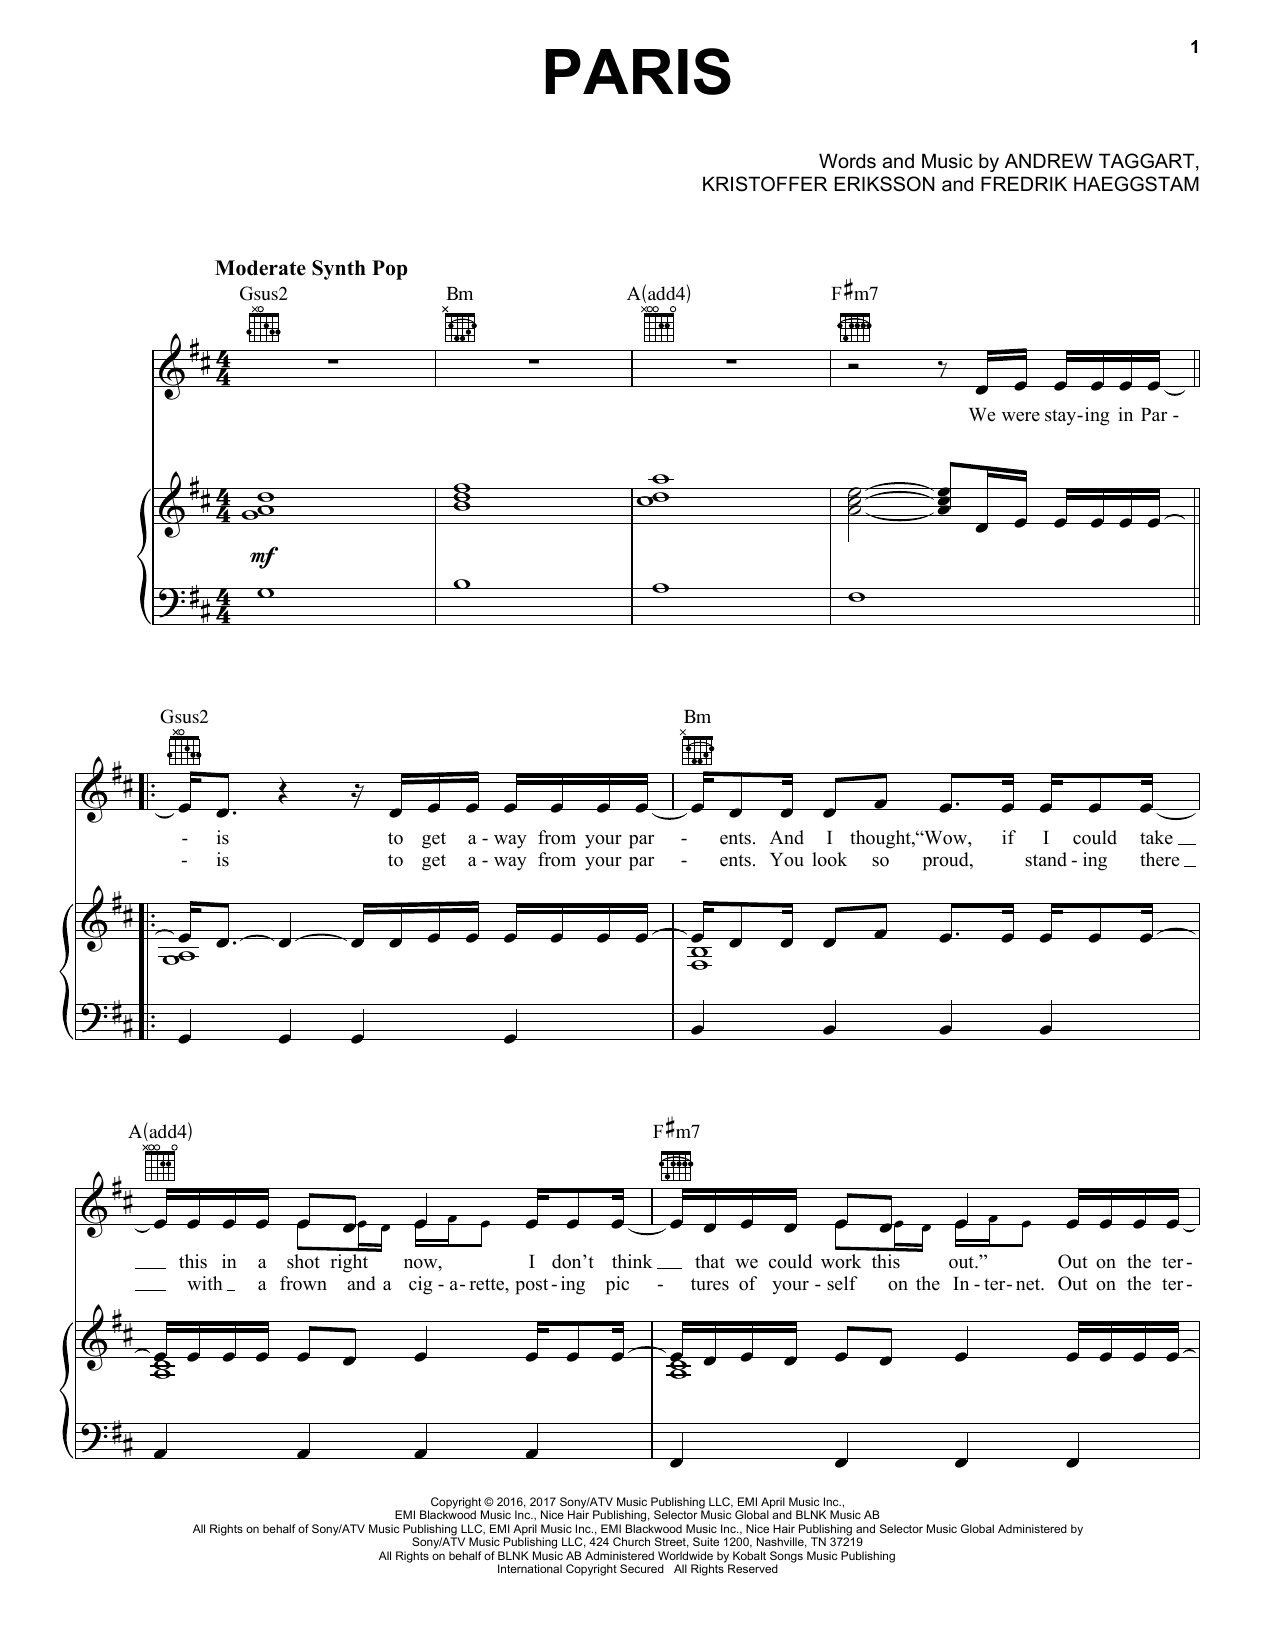 Download The Chainsmokers Paris Sheet Music